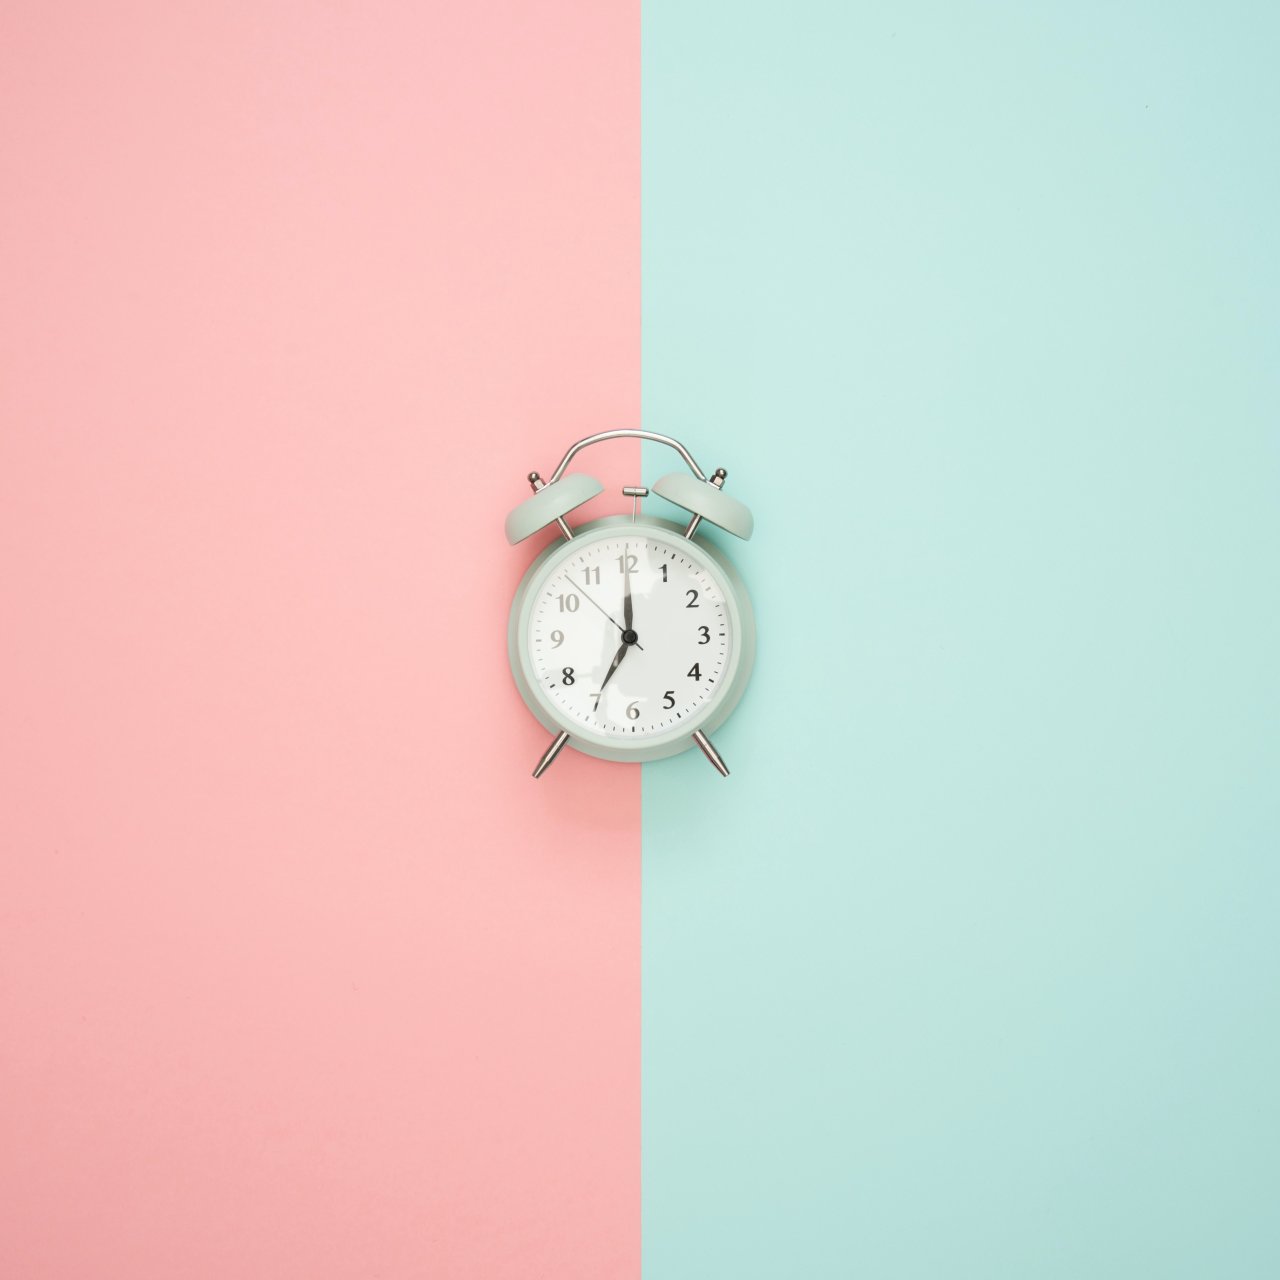 Clock on coloured background.